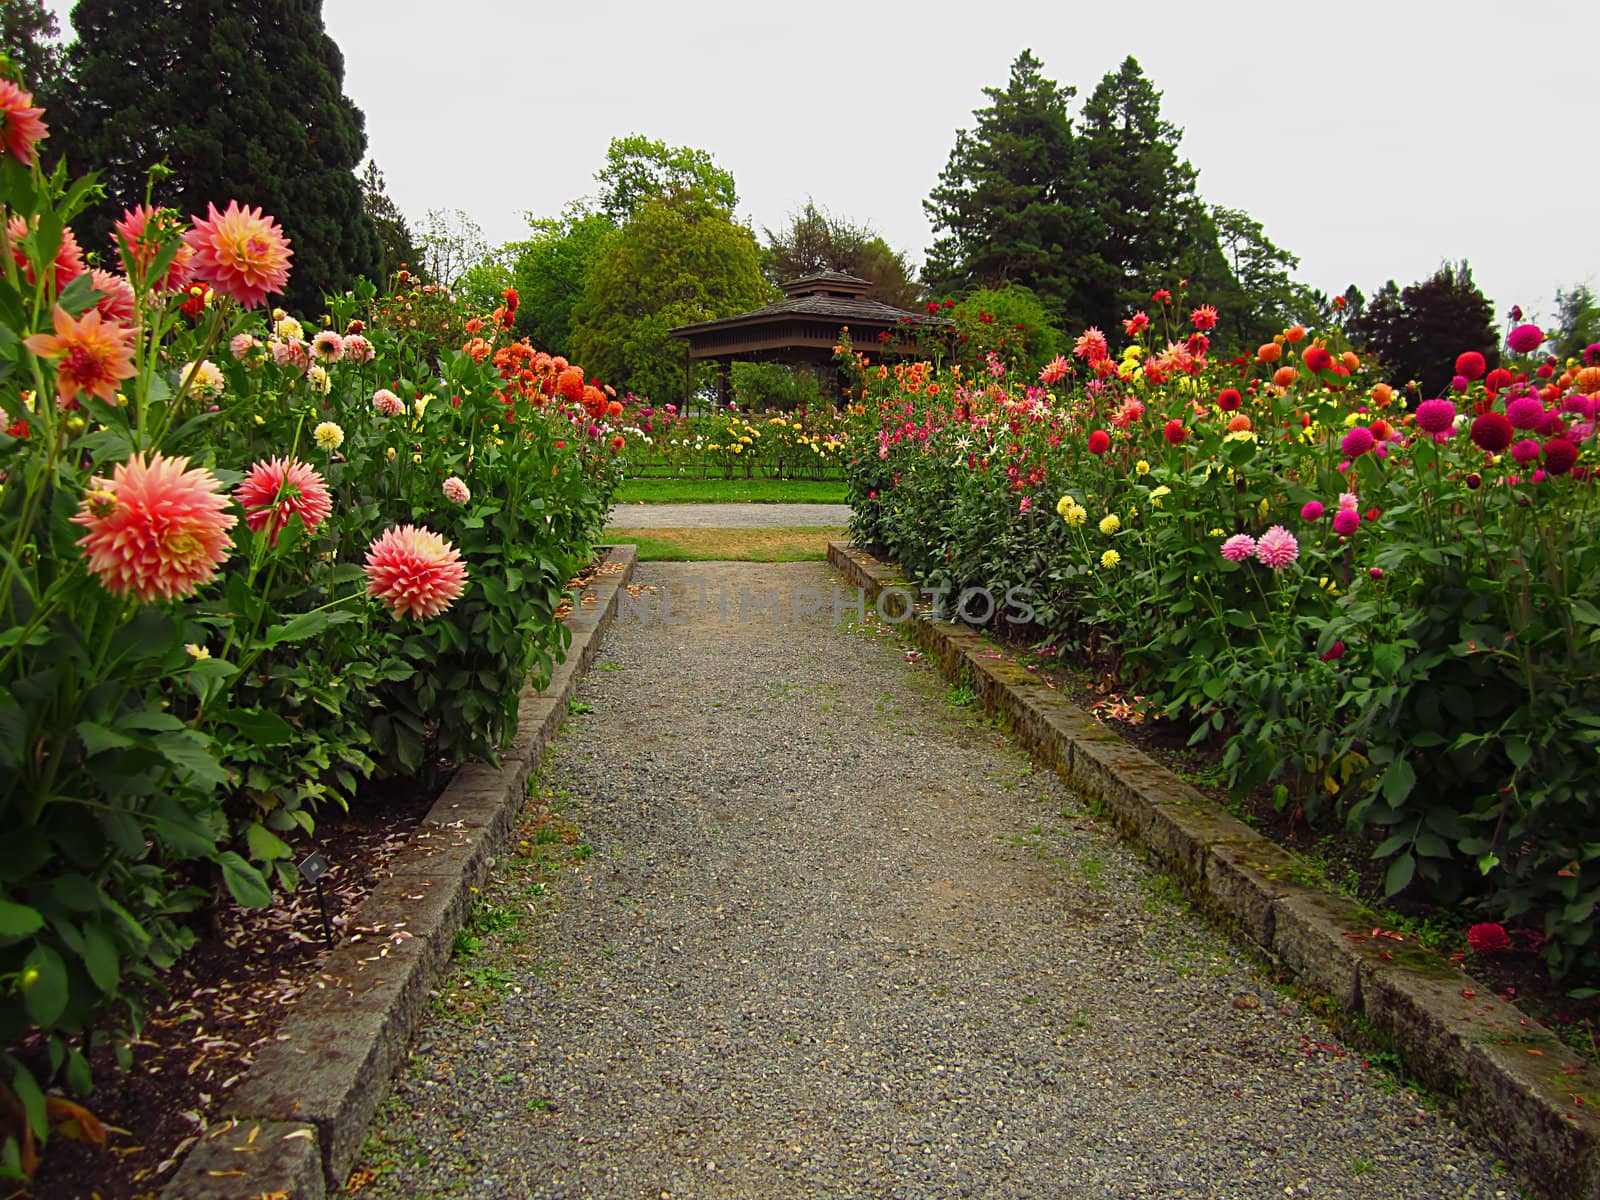 A photograph of a flower garden located at a public park.